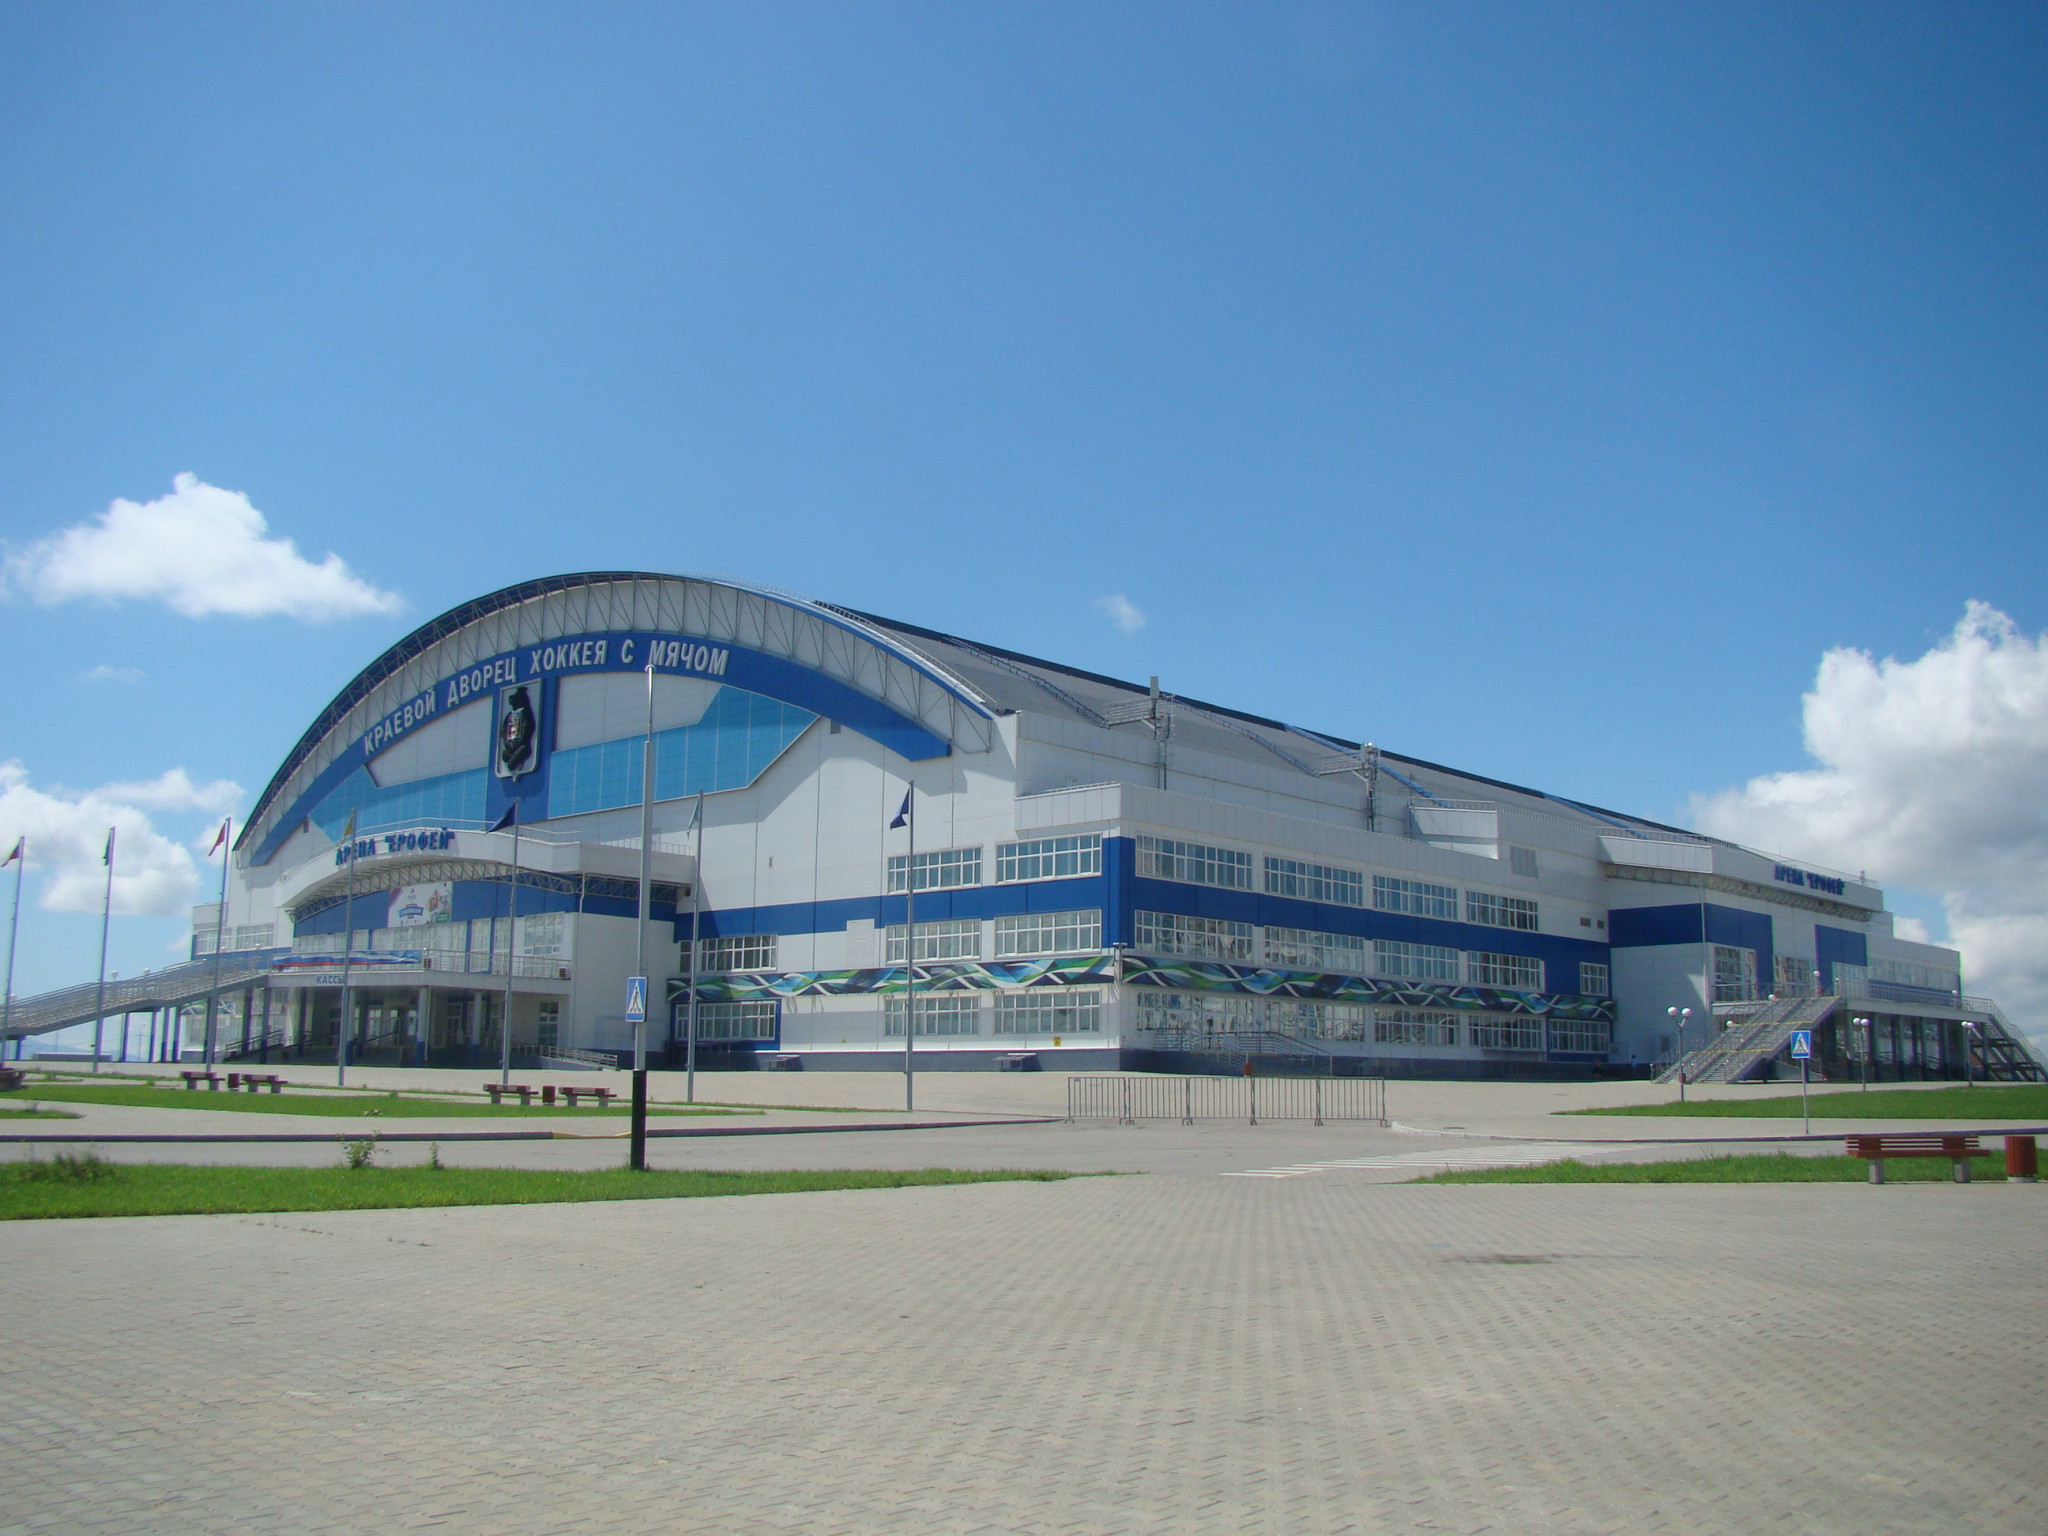 The tournament is taking place at the Arena Yerofey in Khabarovsk ©Wikimedia